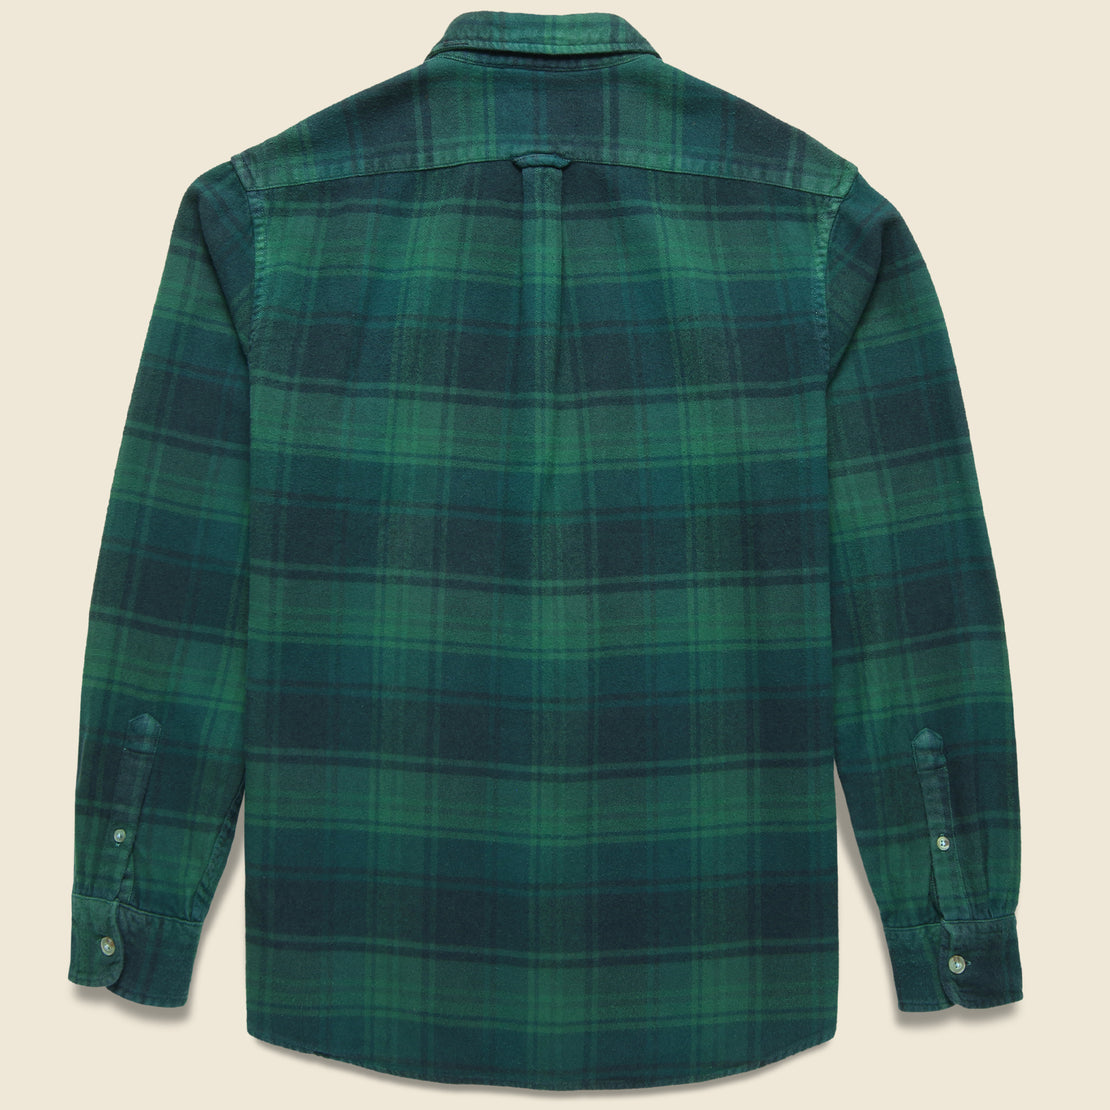 Palisades 3-Ply Jaspe Flannel Shirt - Verdant Green - Grayers - STAG Provisions - Tops - L/S Woven - Plaid